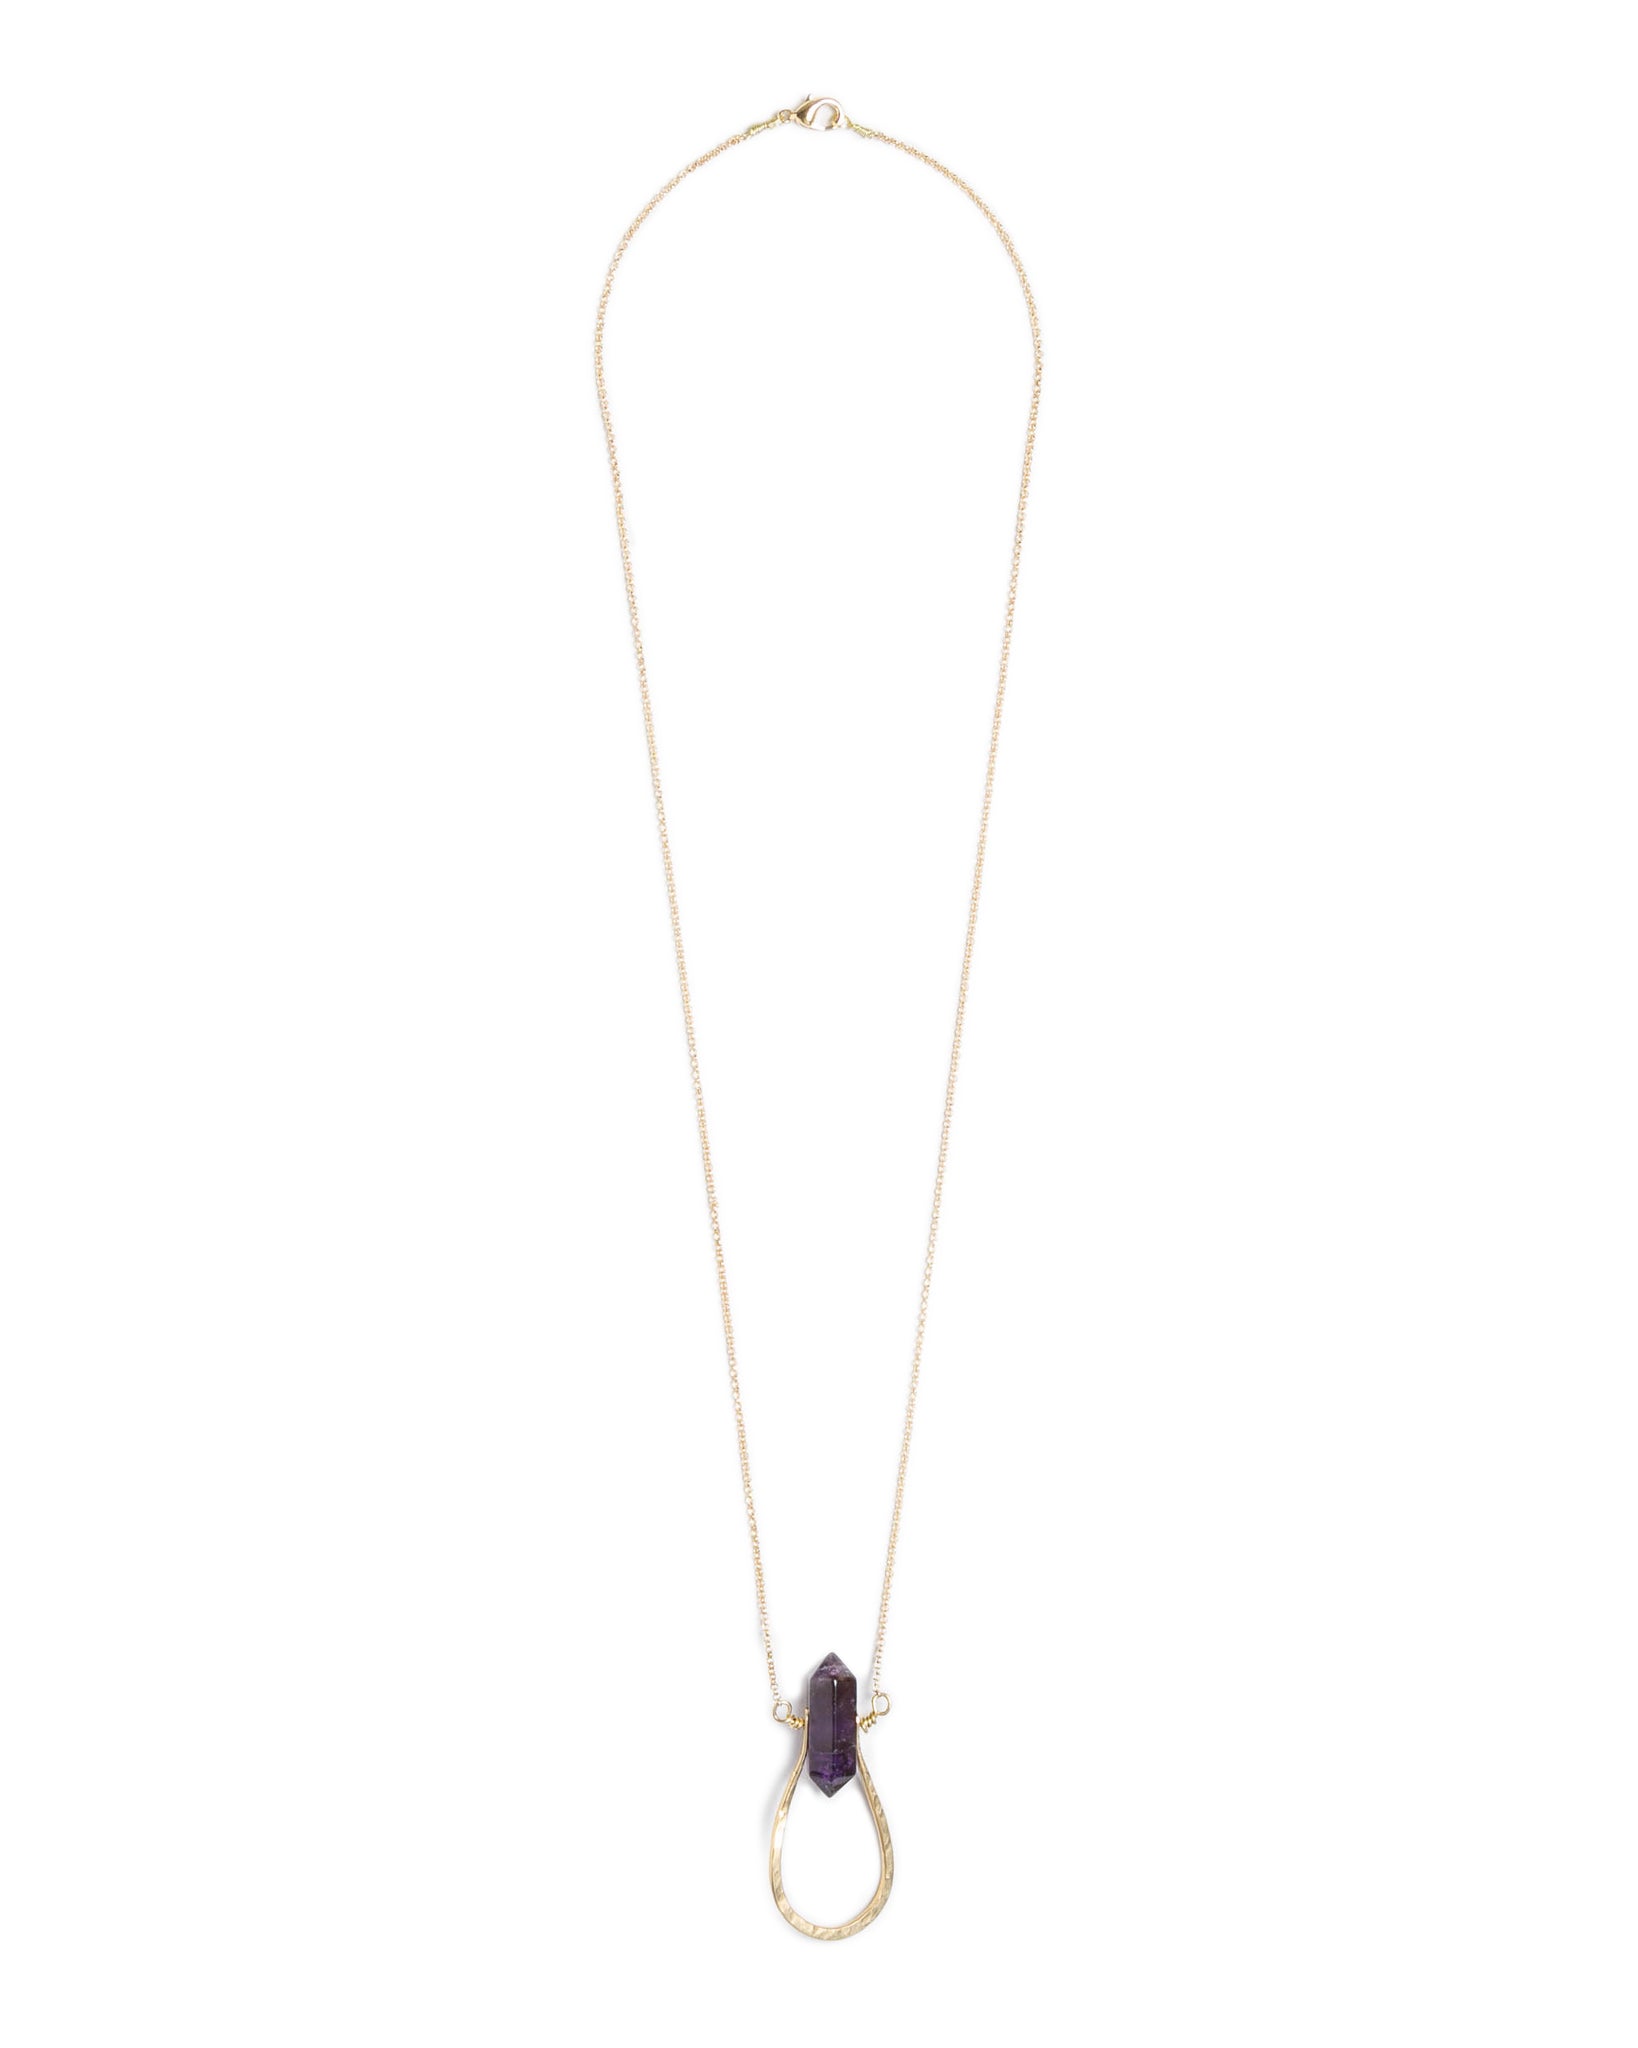 Pinched “U” Amethyst Point Necklace